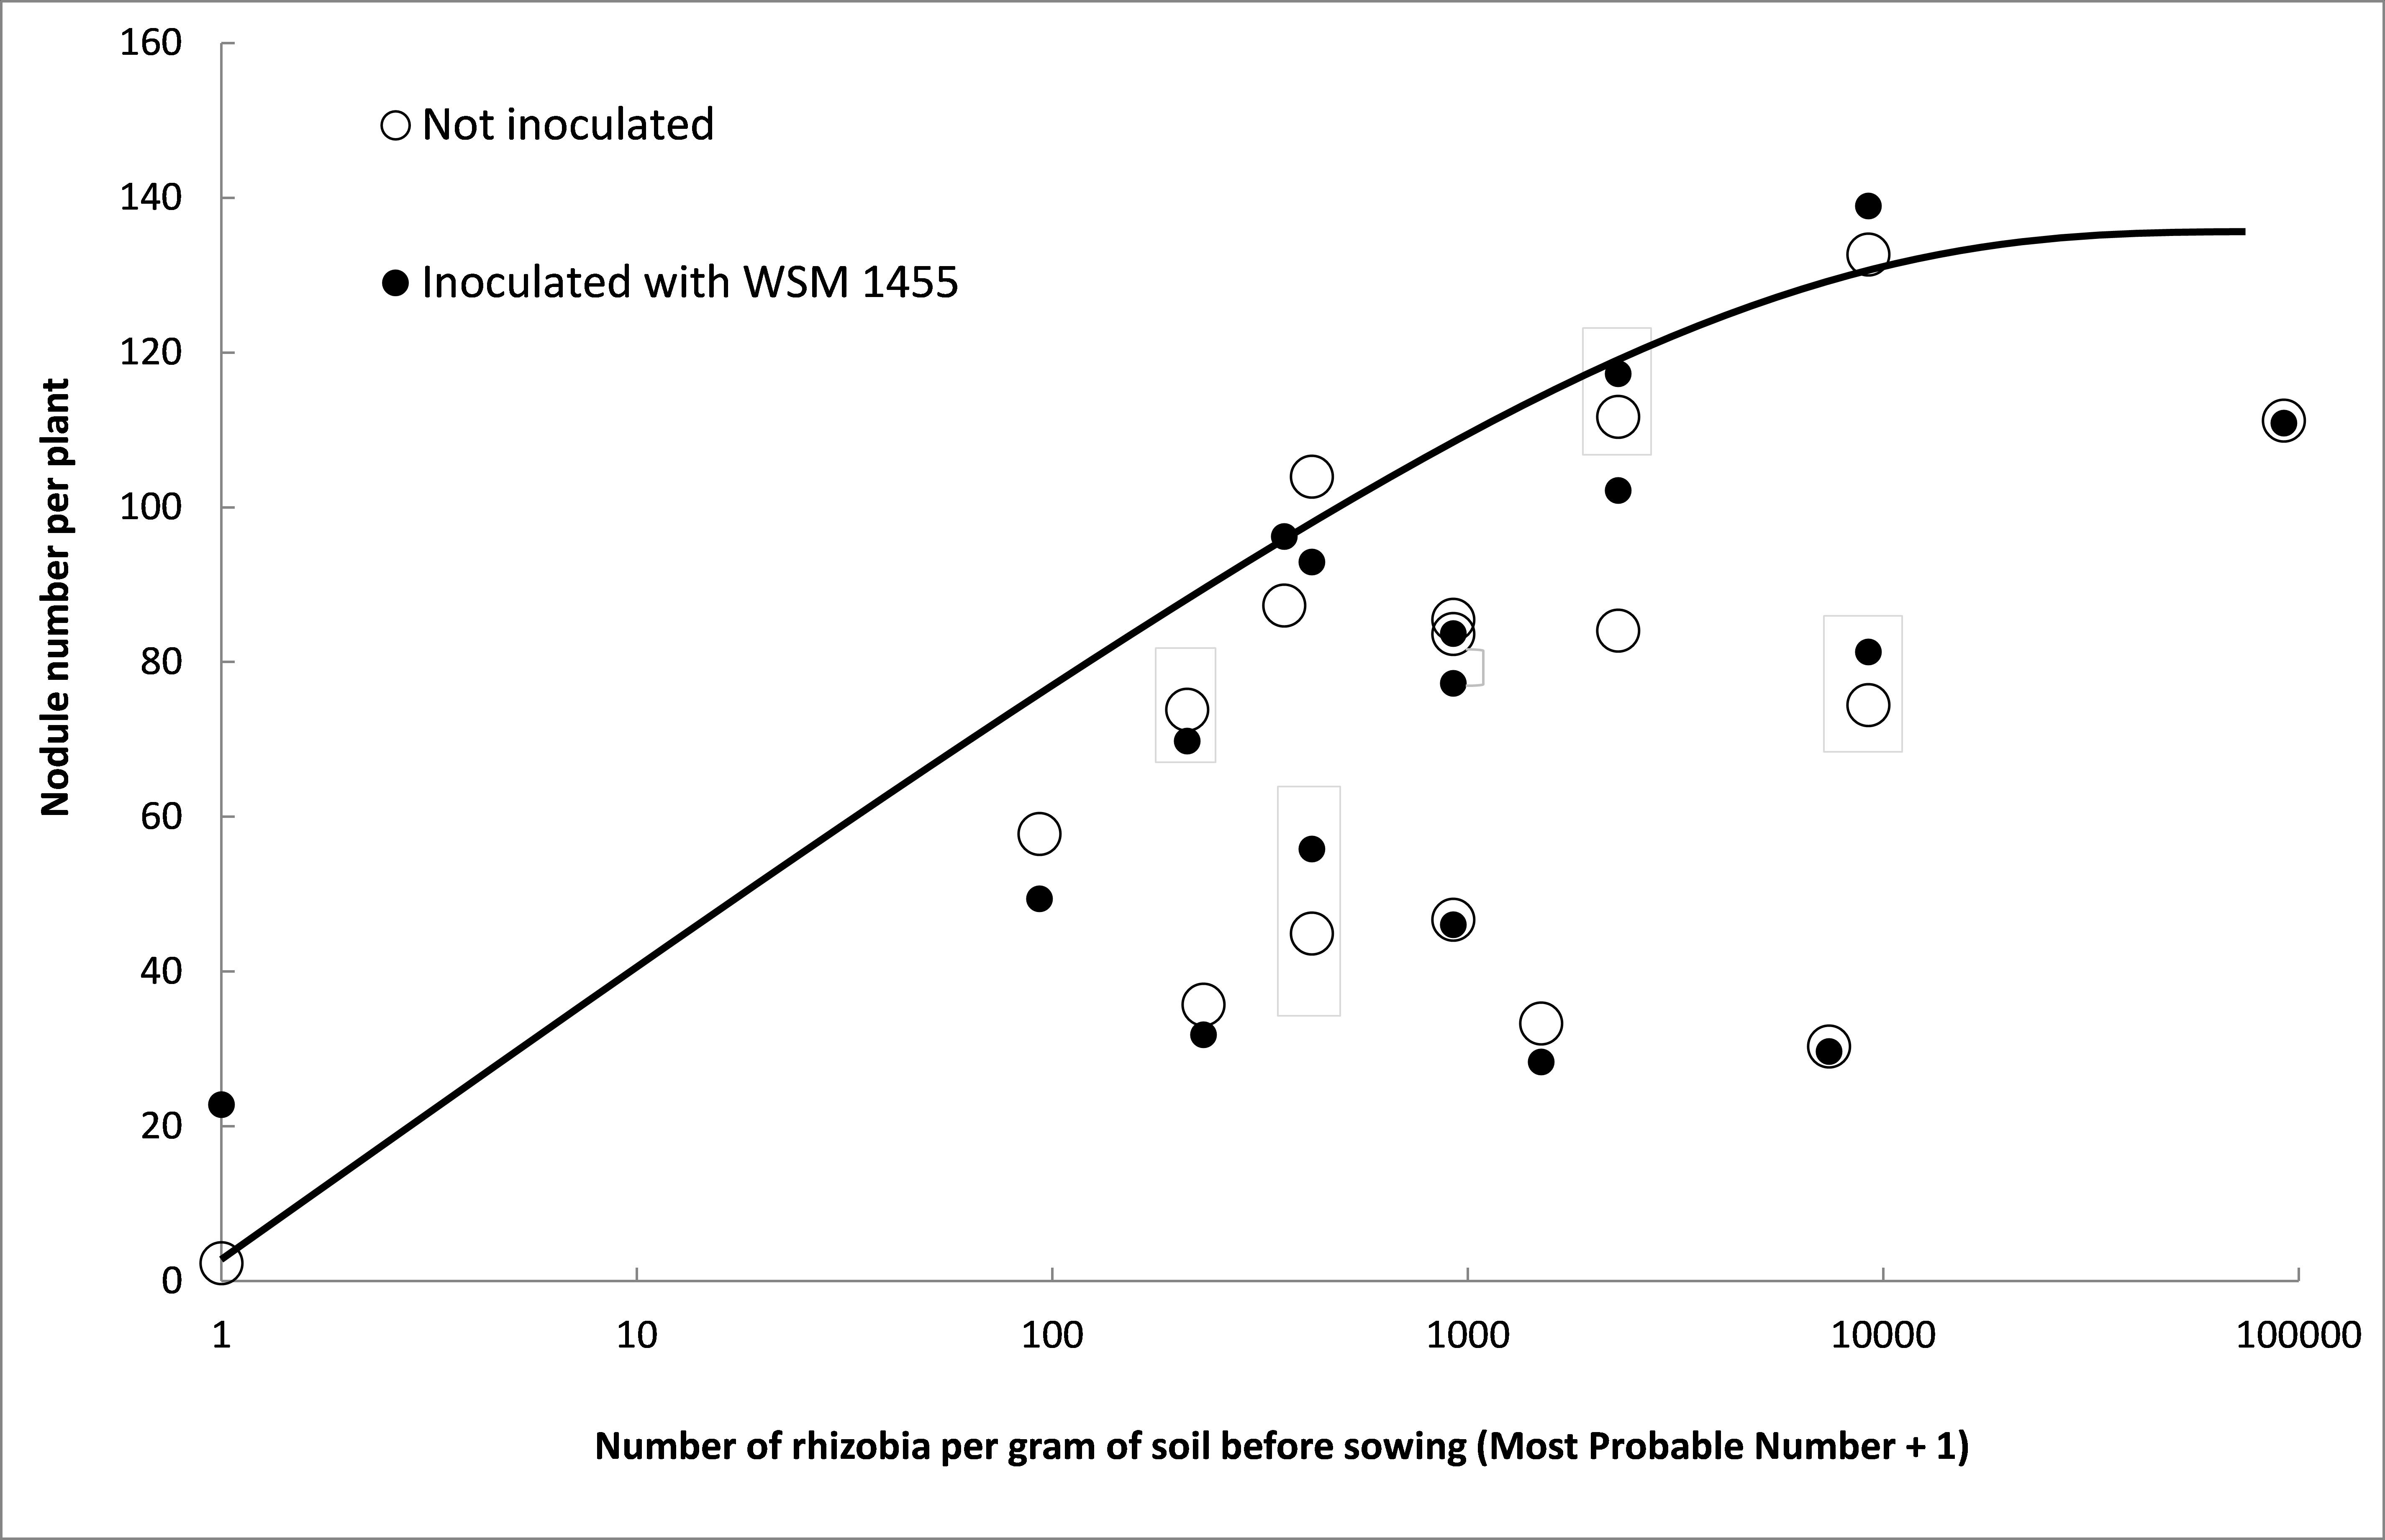 Figure 3: Effect of inoculation (closed circles) with Rhizobium leguminosarum strain WSM 1455 (Group F inoculant) on number of nodules per plant on field pea (cultivar Kaspa) at 17 field sites that varied in number of rhizobia in the soil before sowing. Unbroken line proposes the upper boundary for nodulation at the different levels of soil rhizobia. 